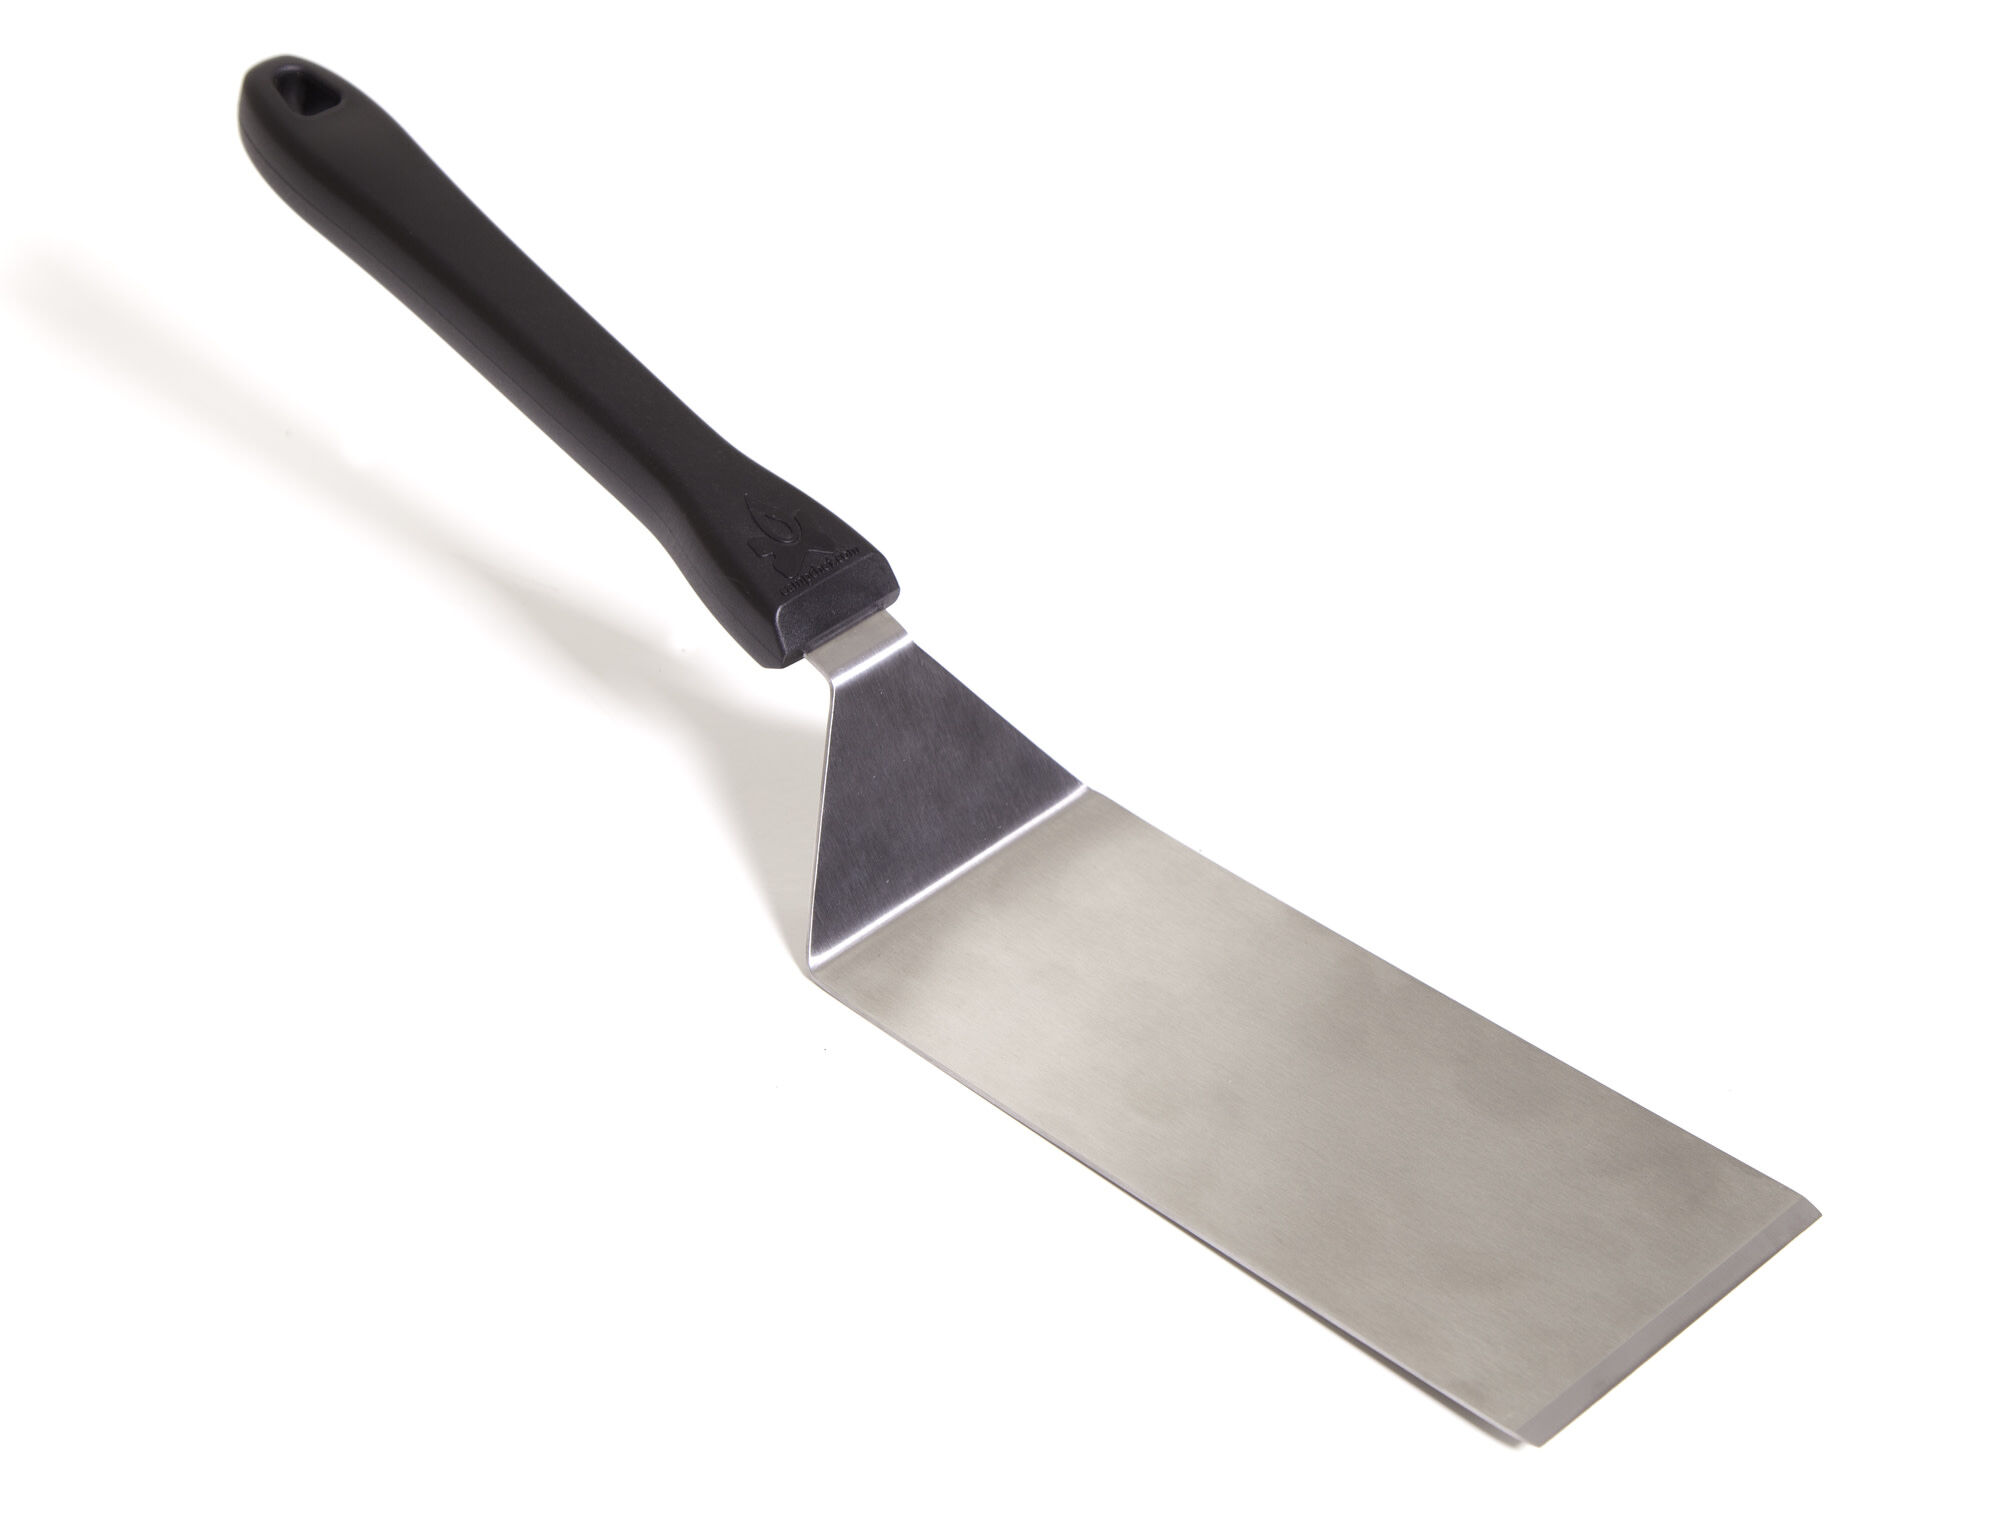 Professional Stainless Steel Long Spatula